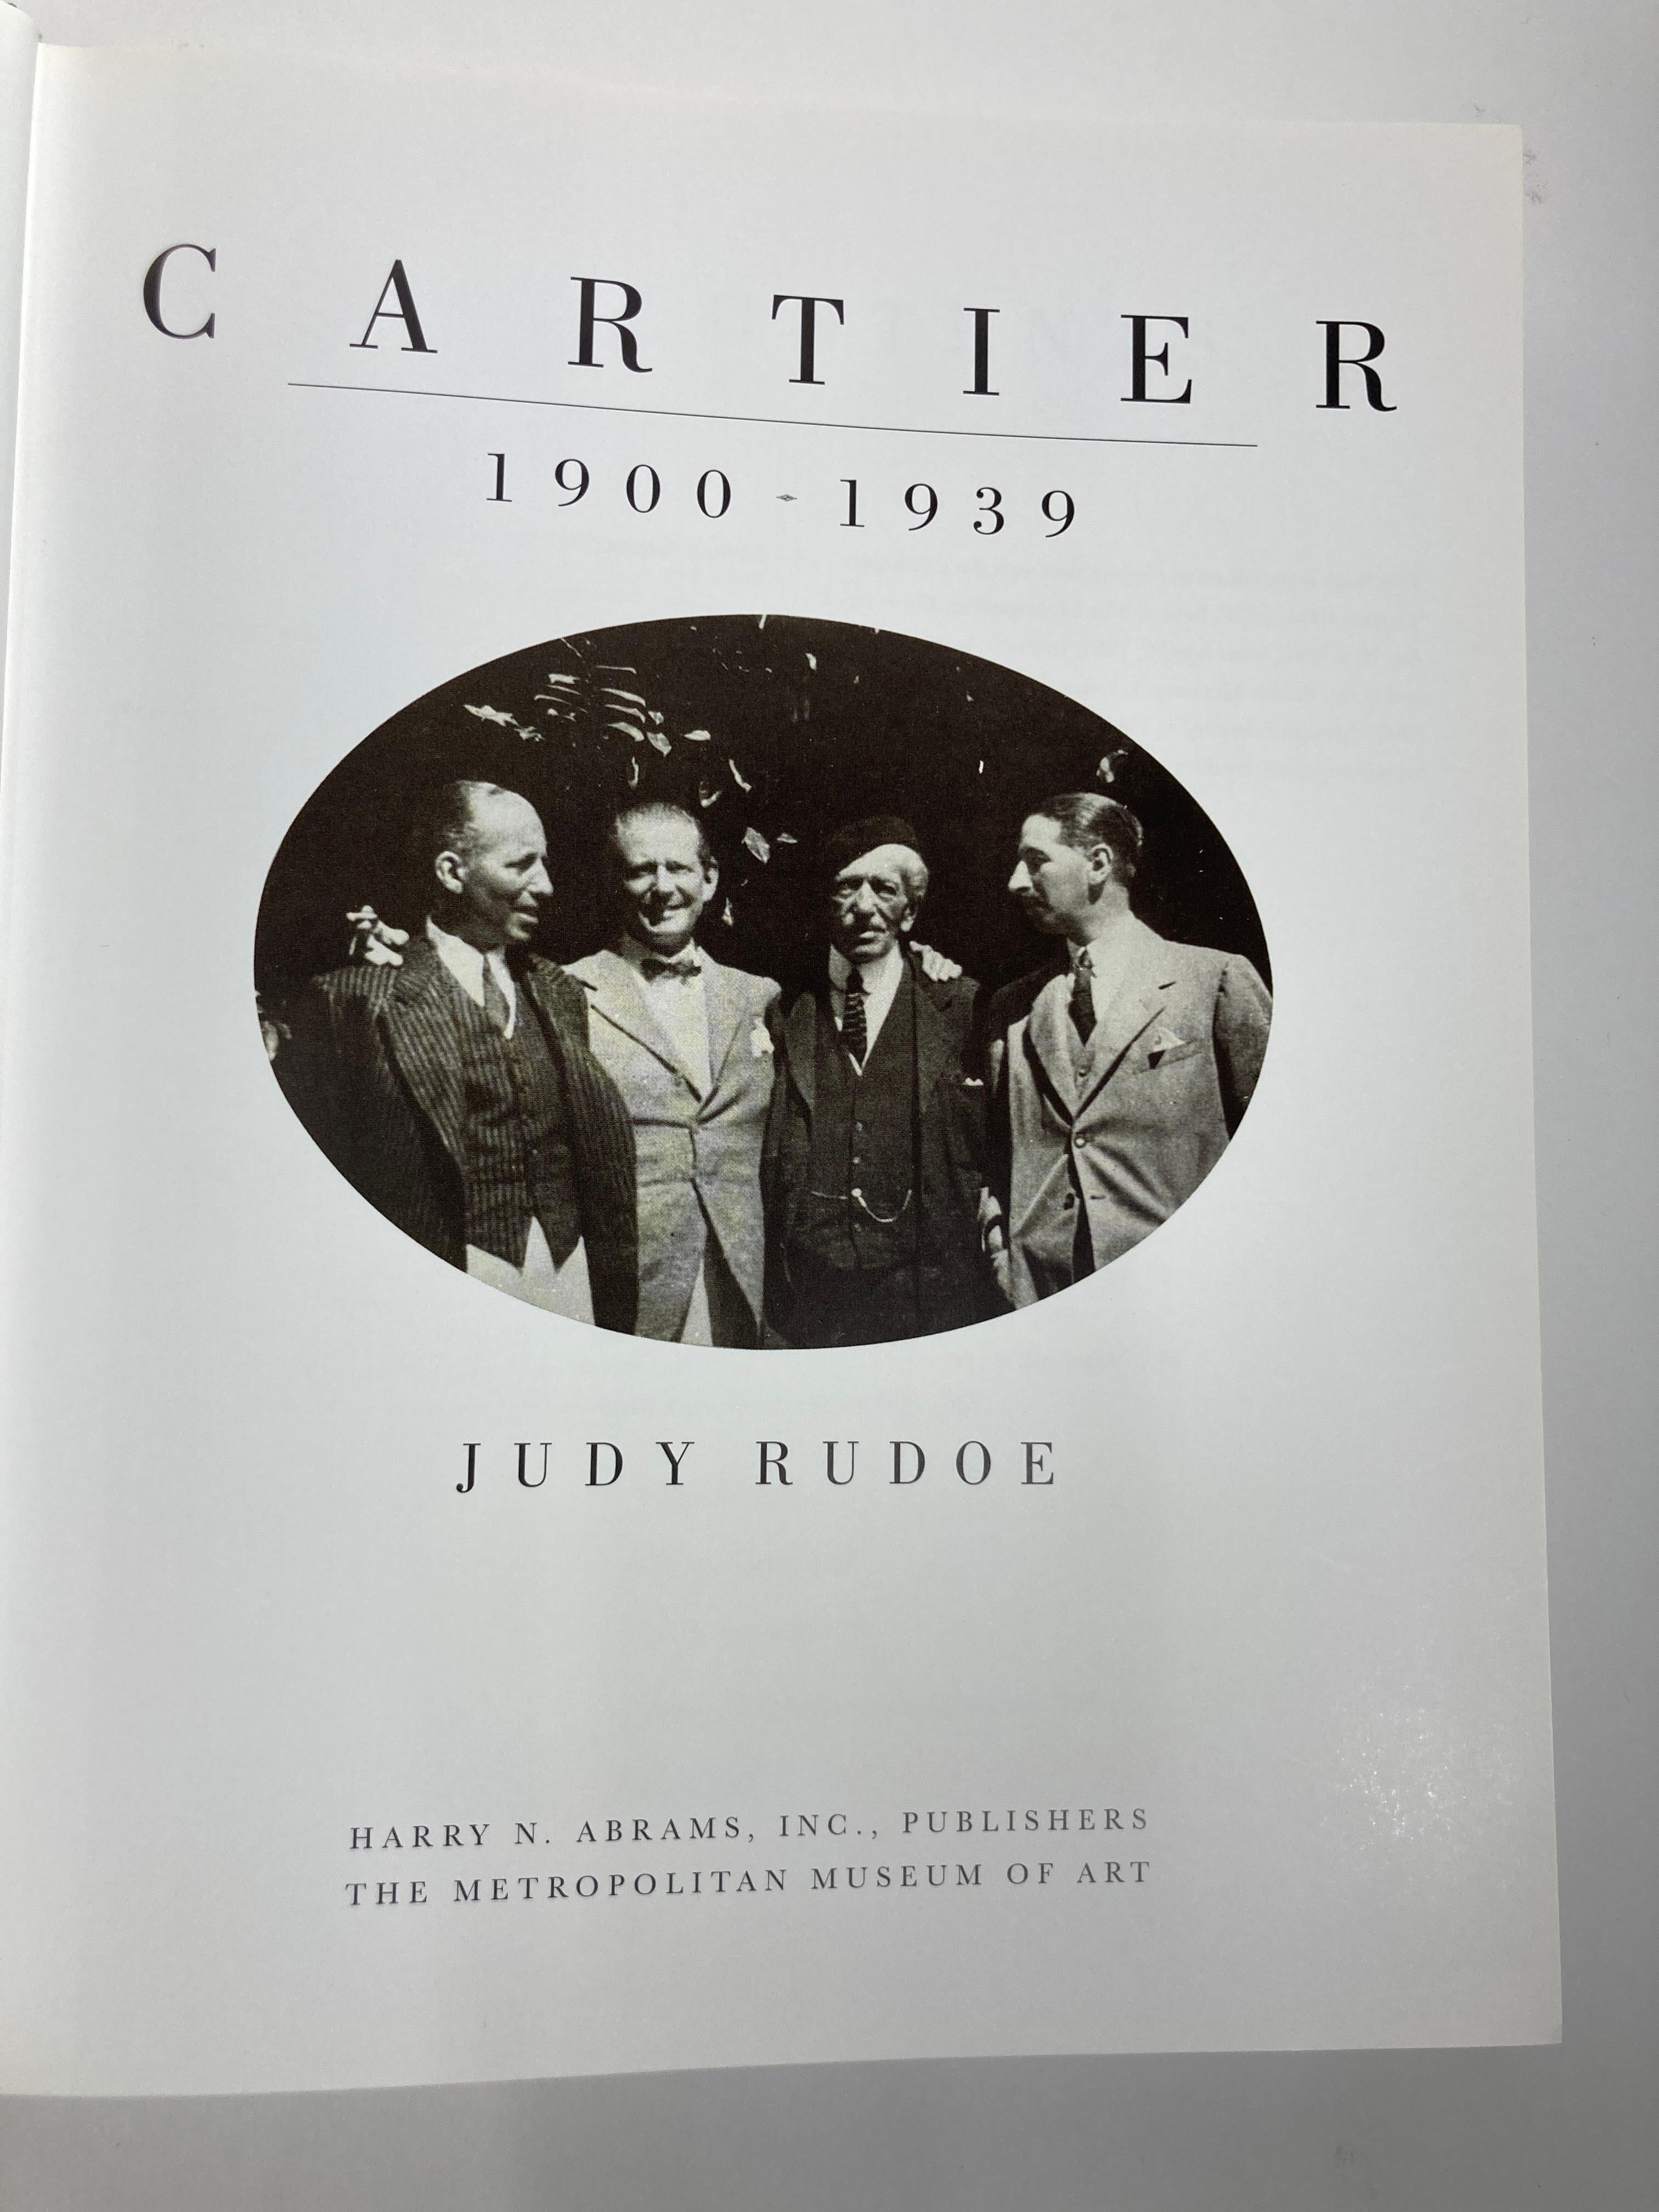 Cartier 1900 to 1939 Hardcover Book 2